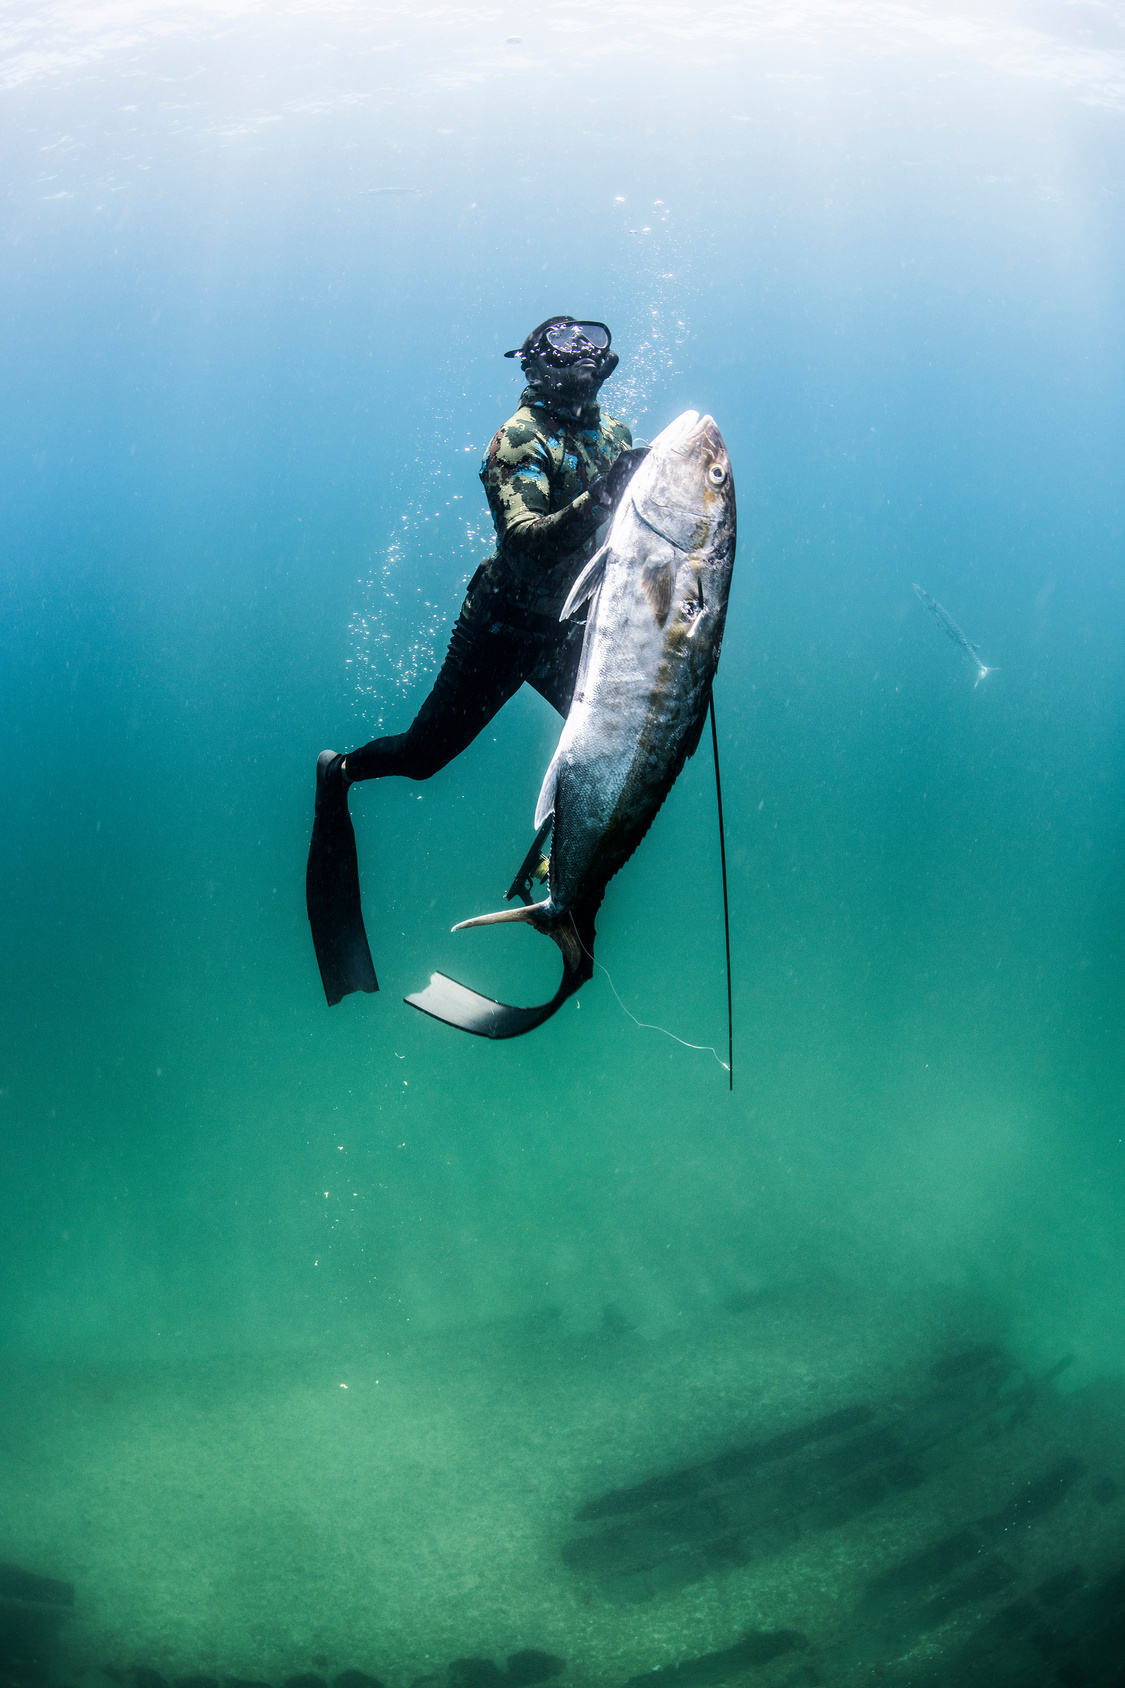 Spearfishing Safety Tips to Avoid a Diving Disaster